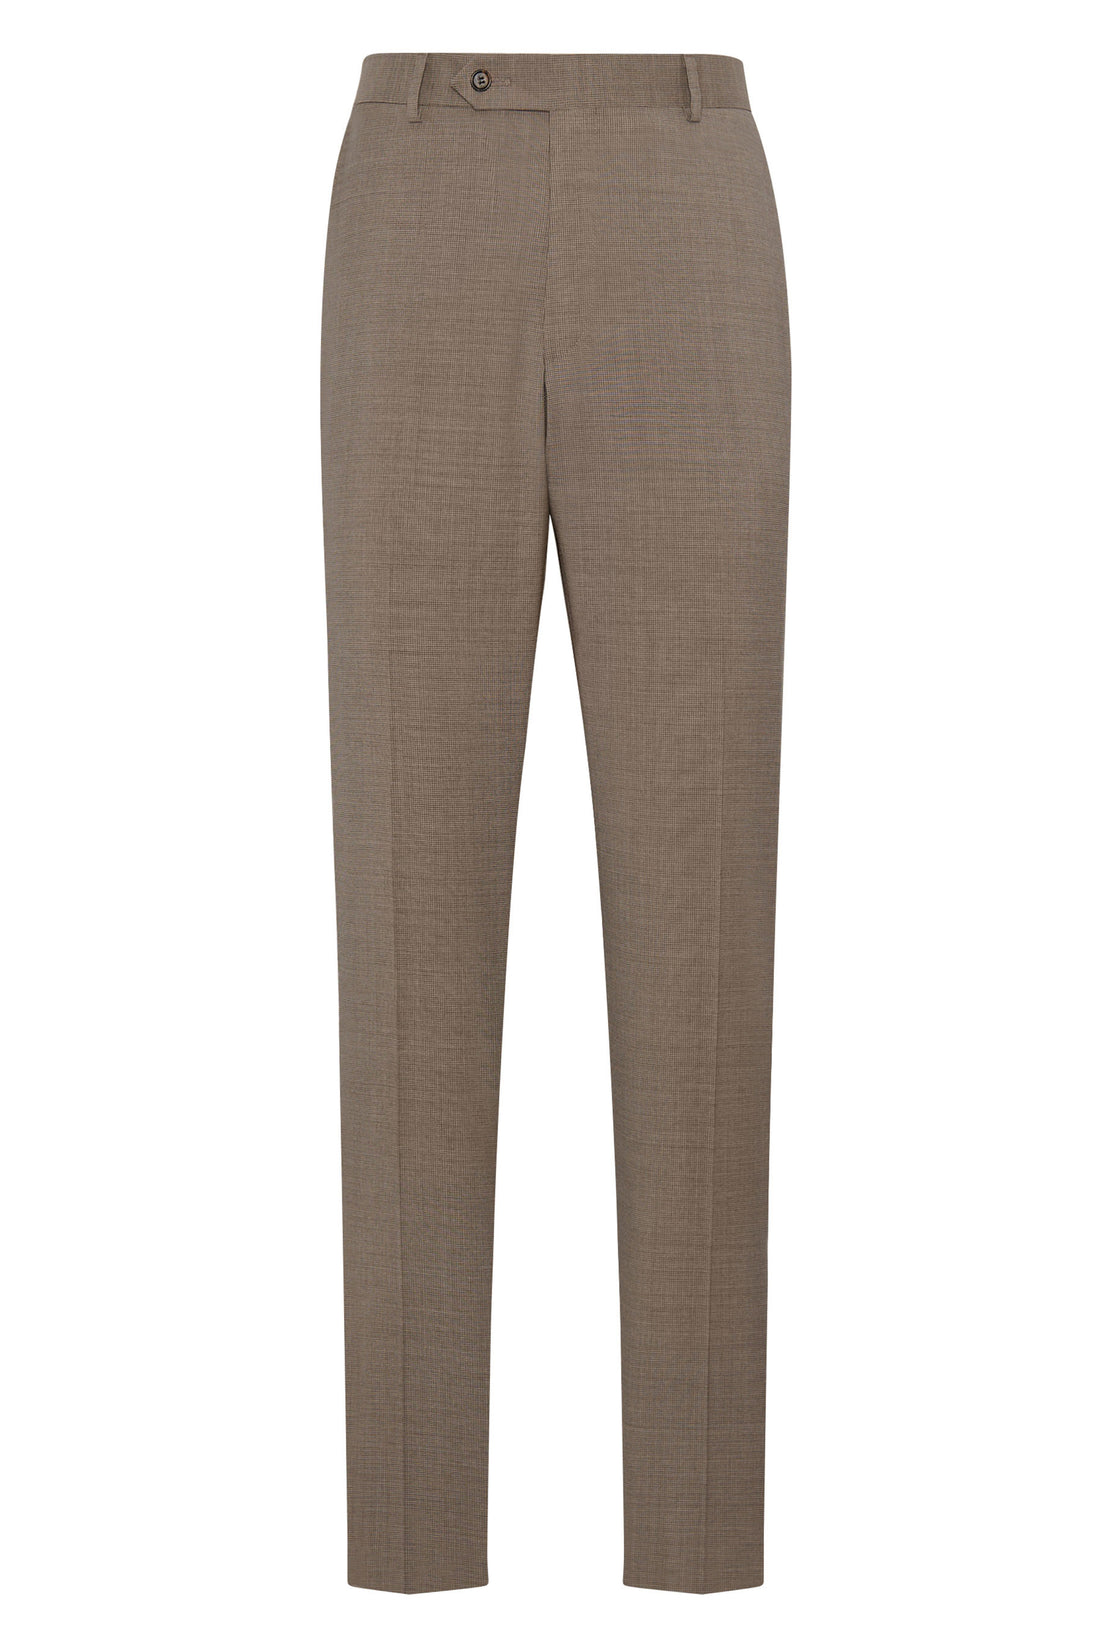 Tan Tropical Wool Neat Flat Front Trousers